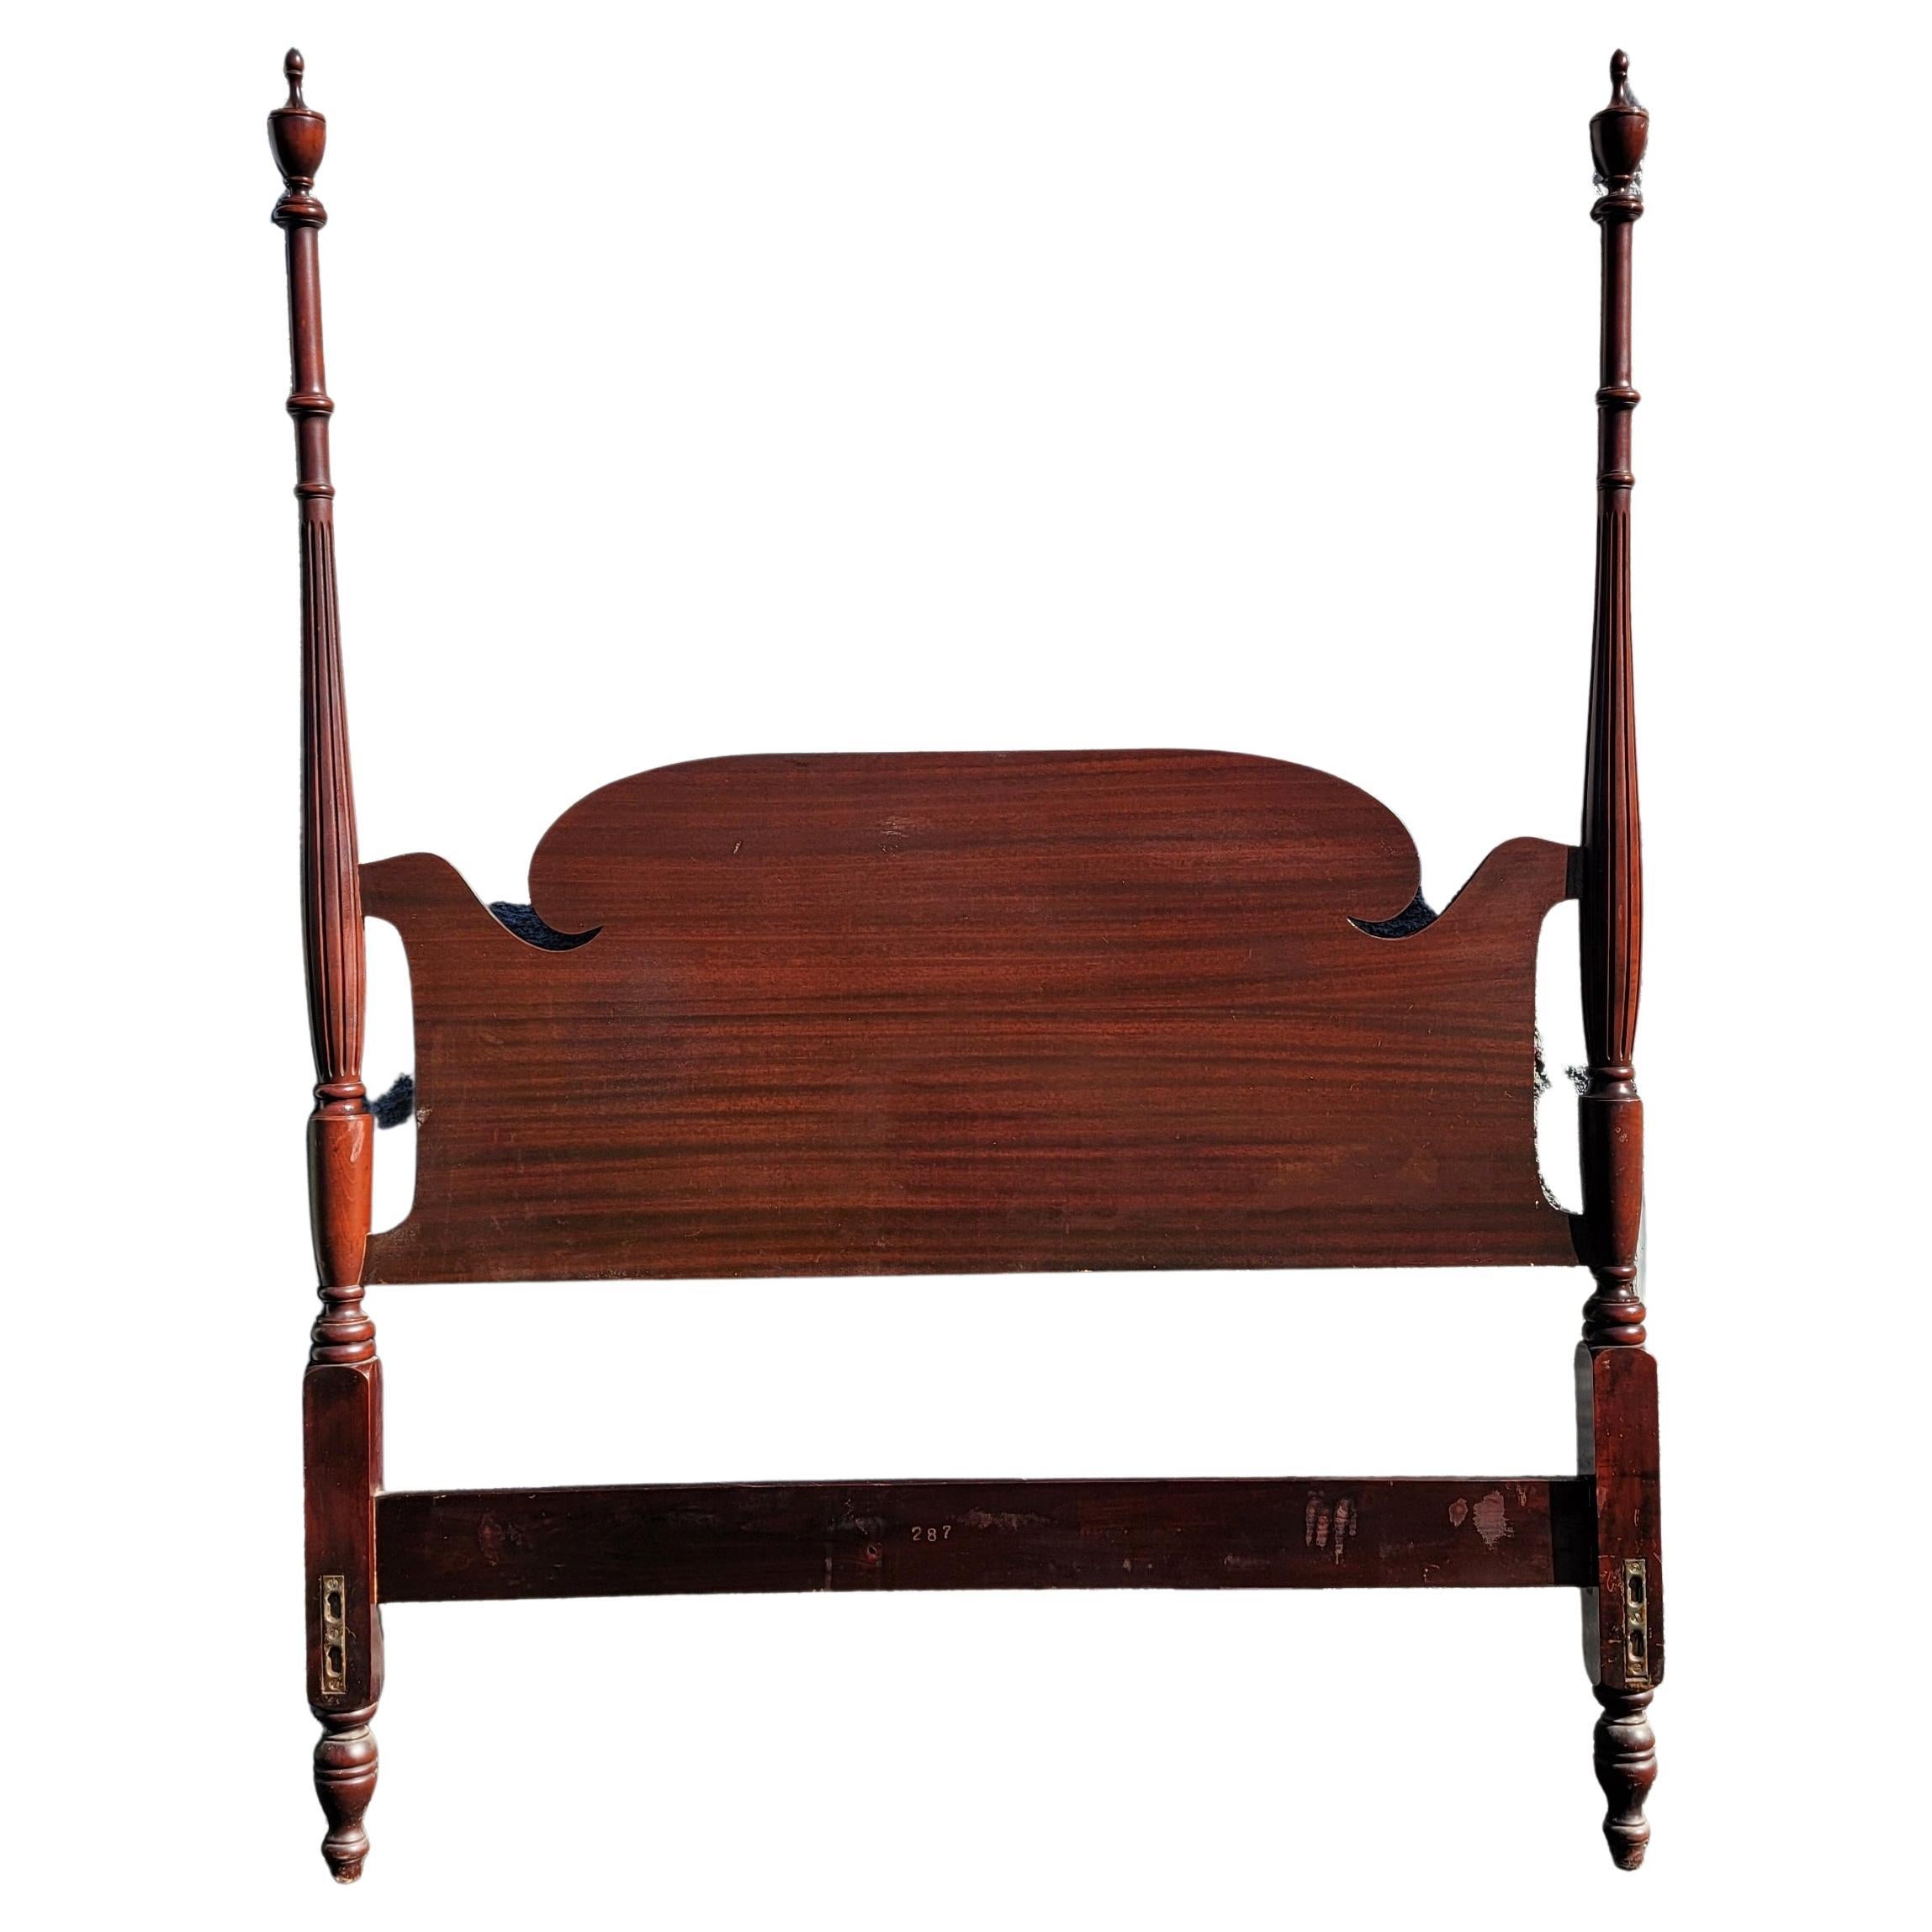 A 1930s pure Mahogany full size Poster Bedstead with urn finials.
Measures 80.5